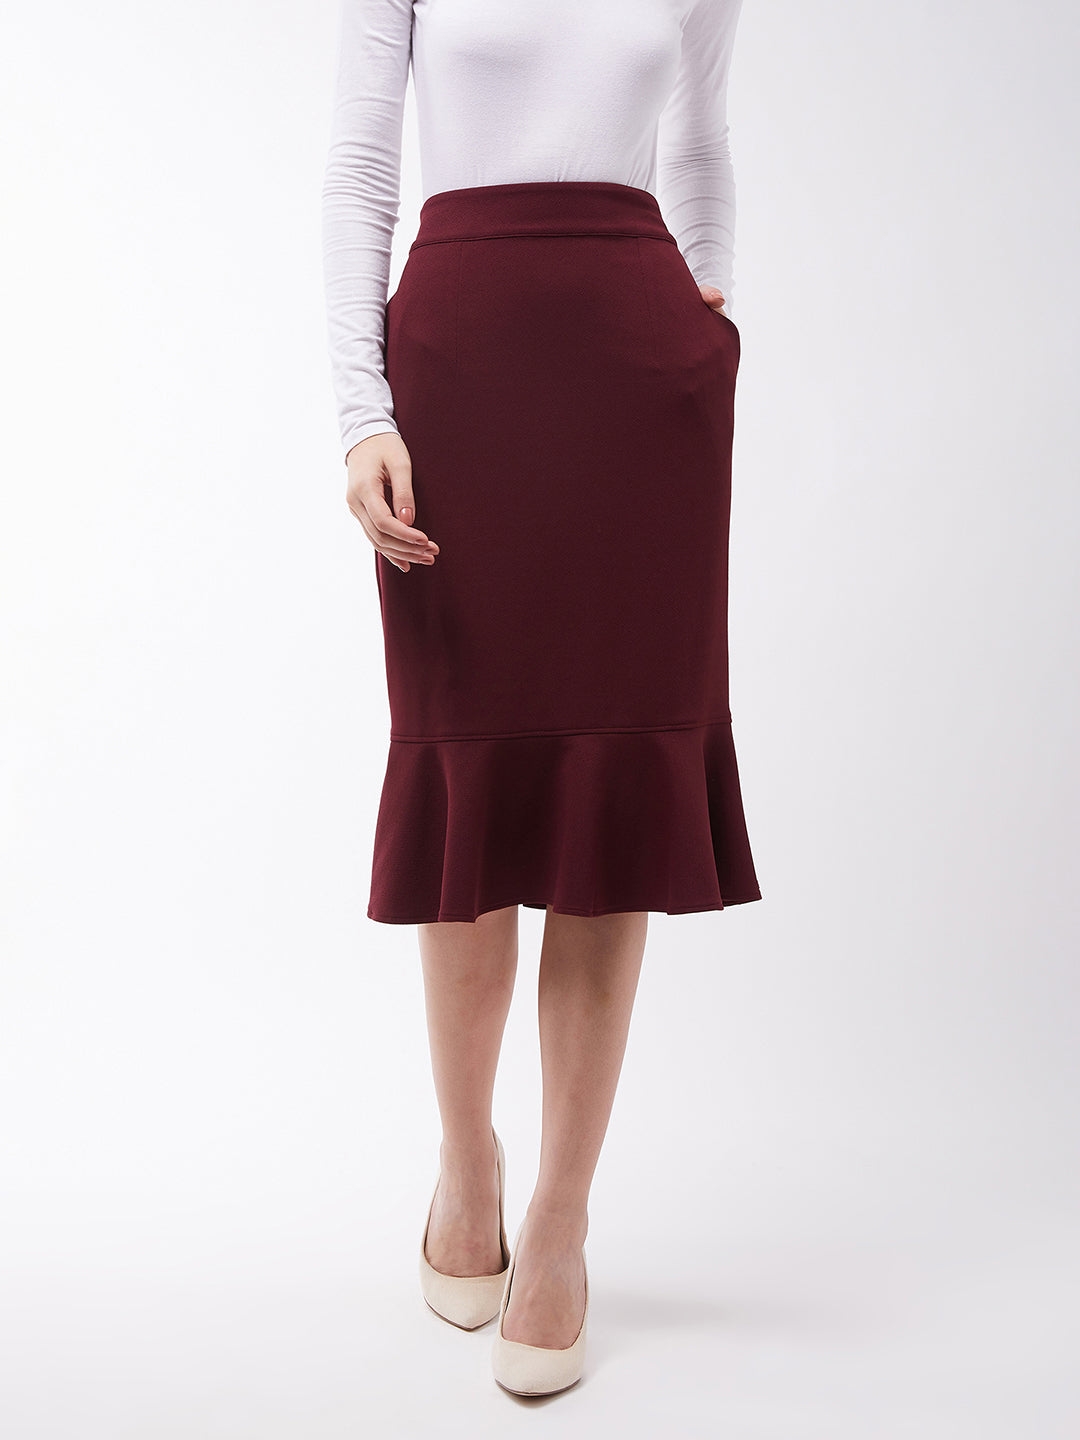 MISS CHASE | Red Solid Polyester Slim Fit Knee-Long Length Skirt